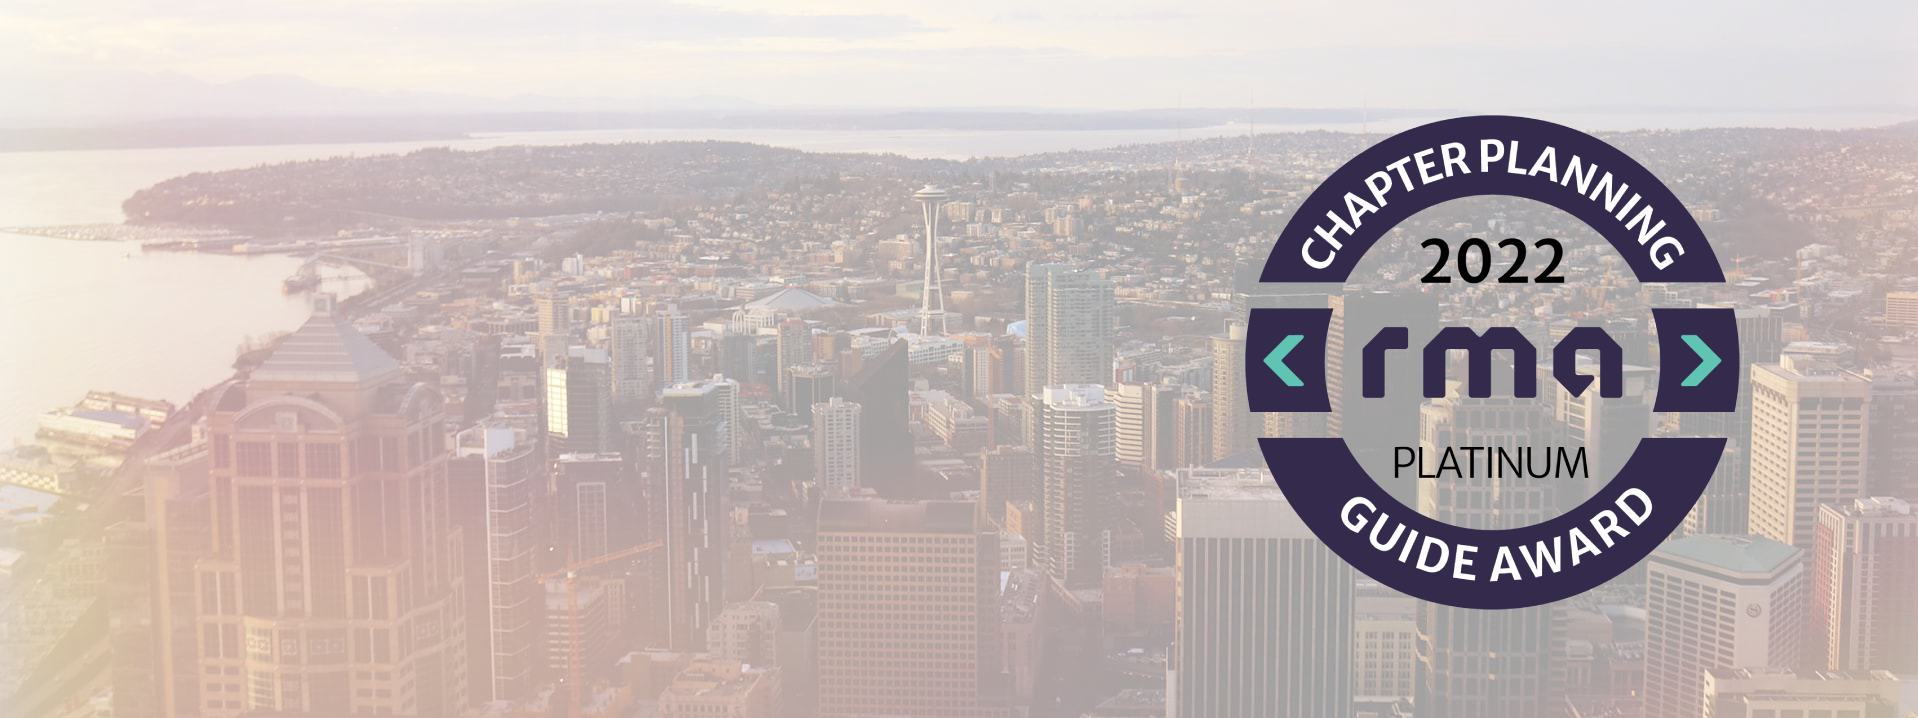 Seattle overview with an awards winning logo